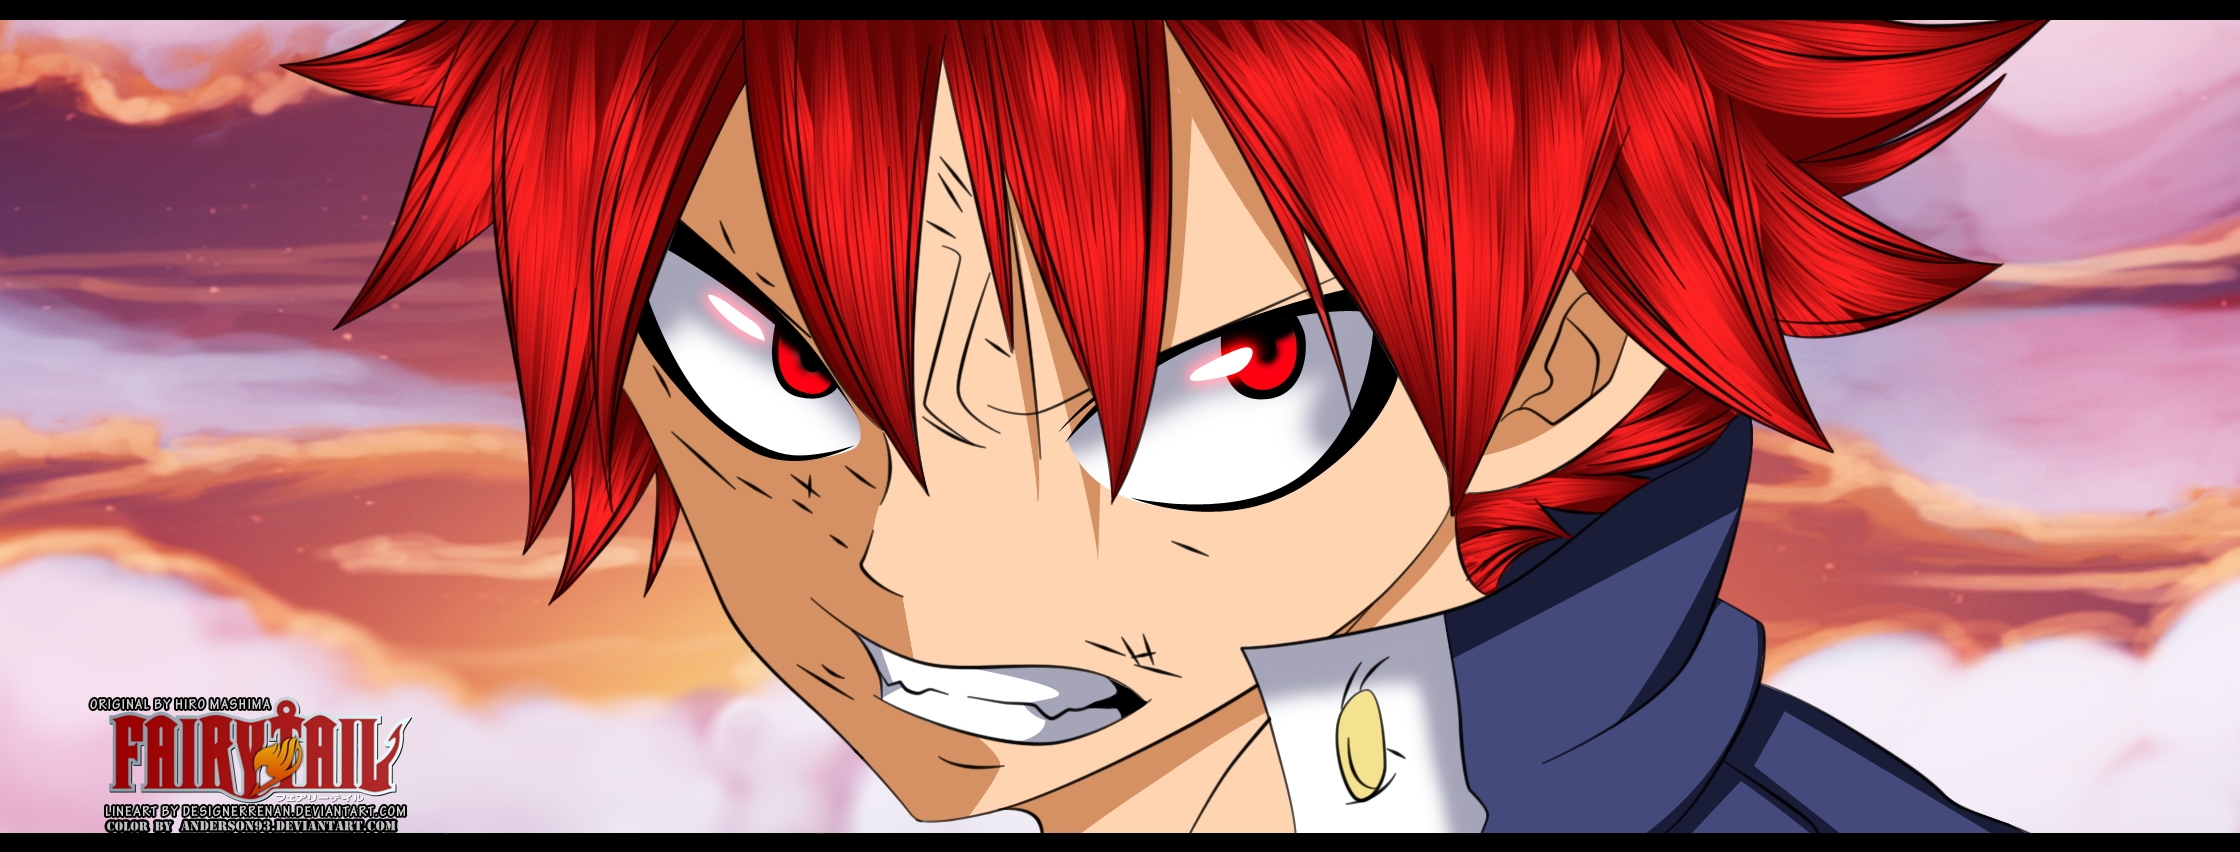 Anime Fairy Tail Picture by Anderson93